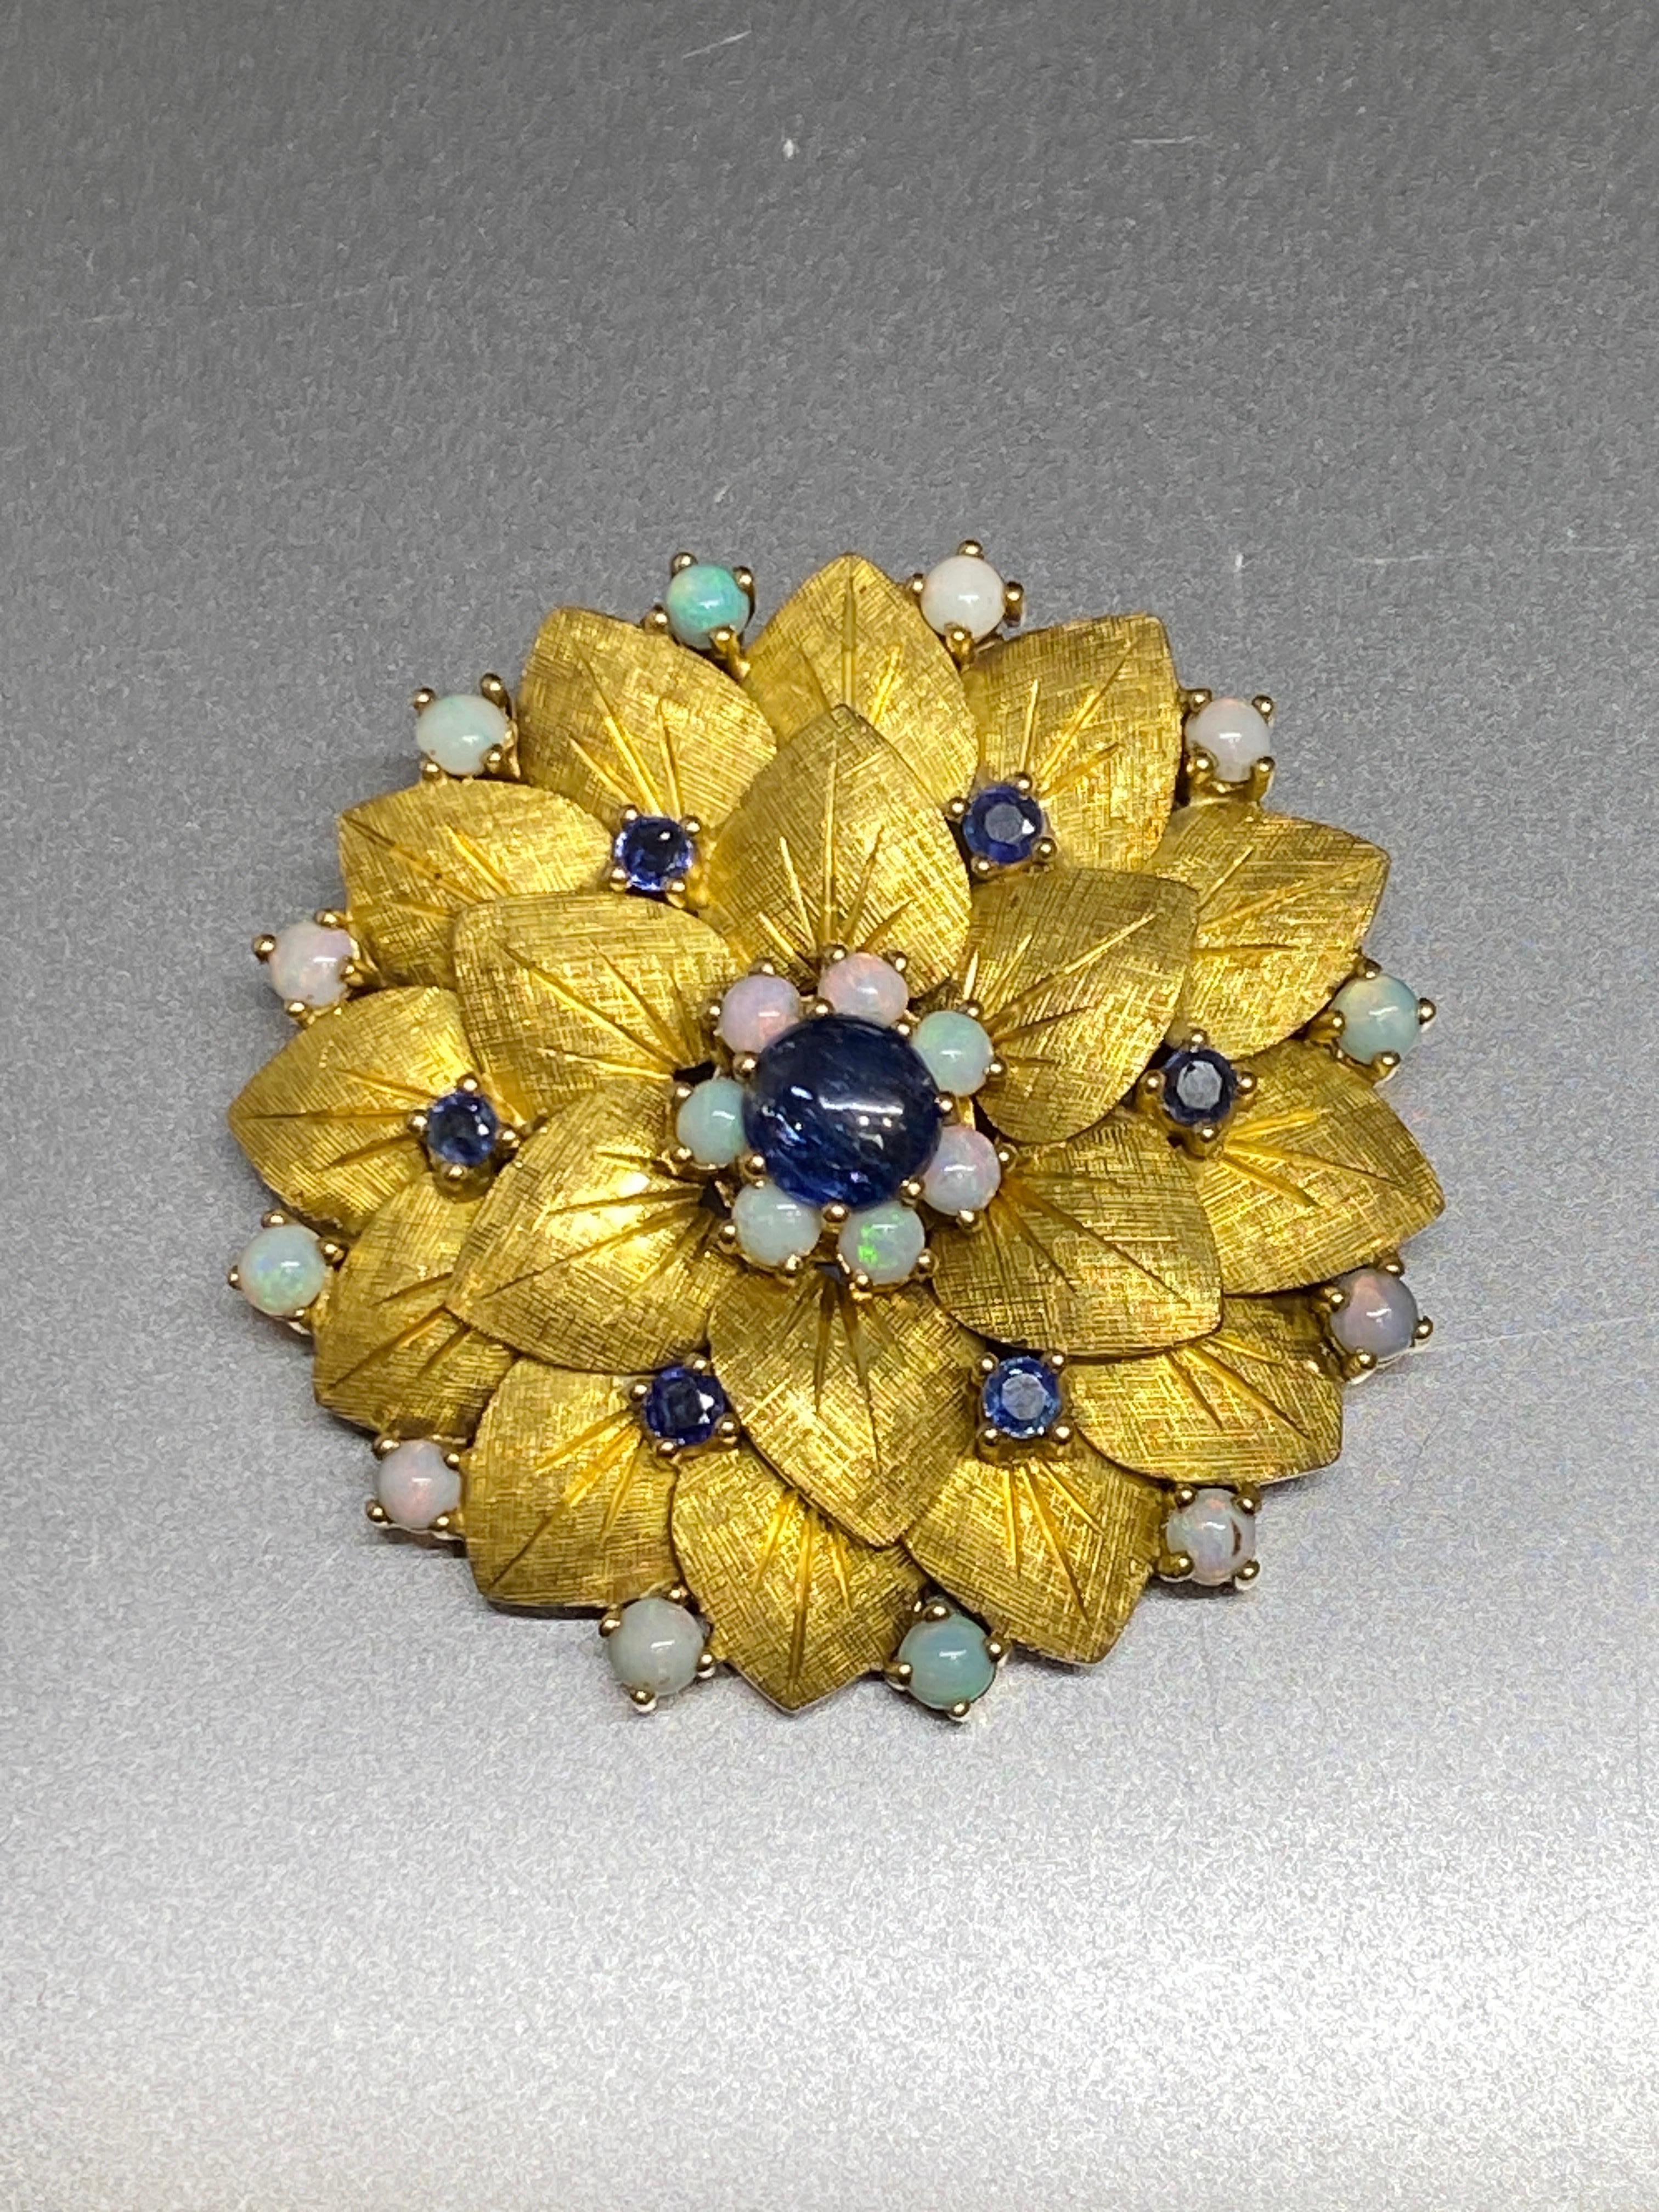 Fine 14k yellow gold, blue sapphire and opal flower brooch.  Gorgeous color combination of lustrous yellow gold rich blue sapphire and the play of color of the pastel opals.  

Two rows of artfully modeled petals with a beautiful florentine textured